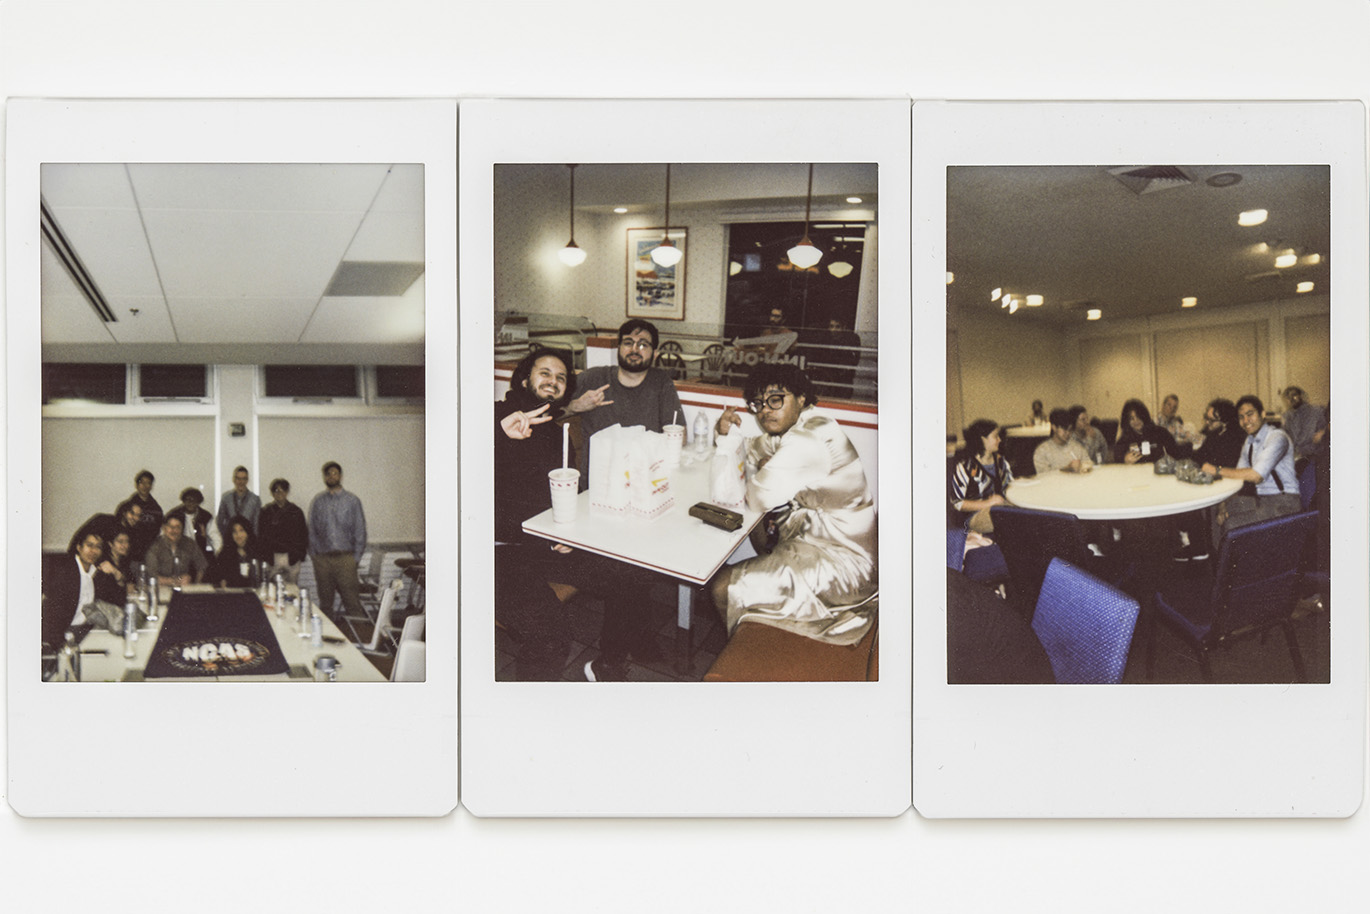 Set of three scanned polaroid photos showing college students spending time together indoors.